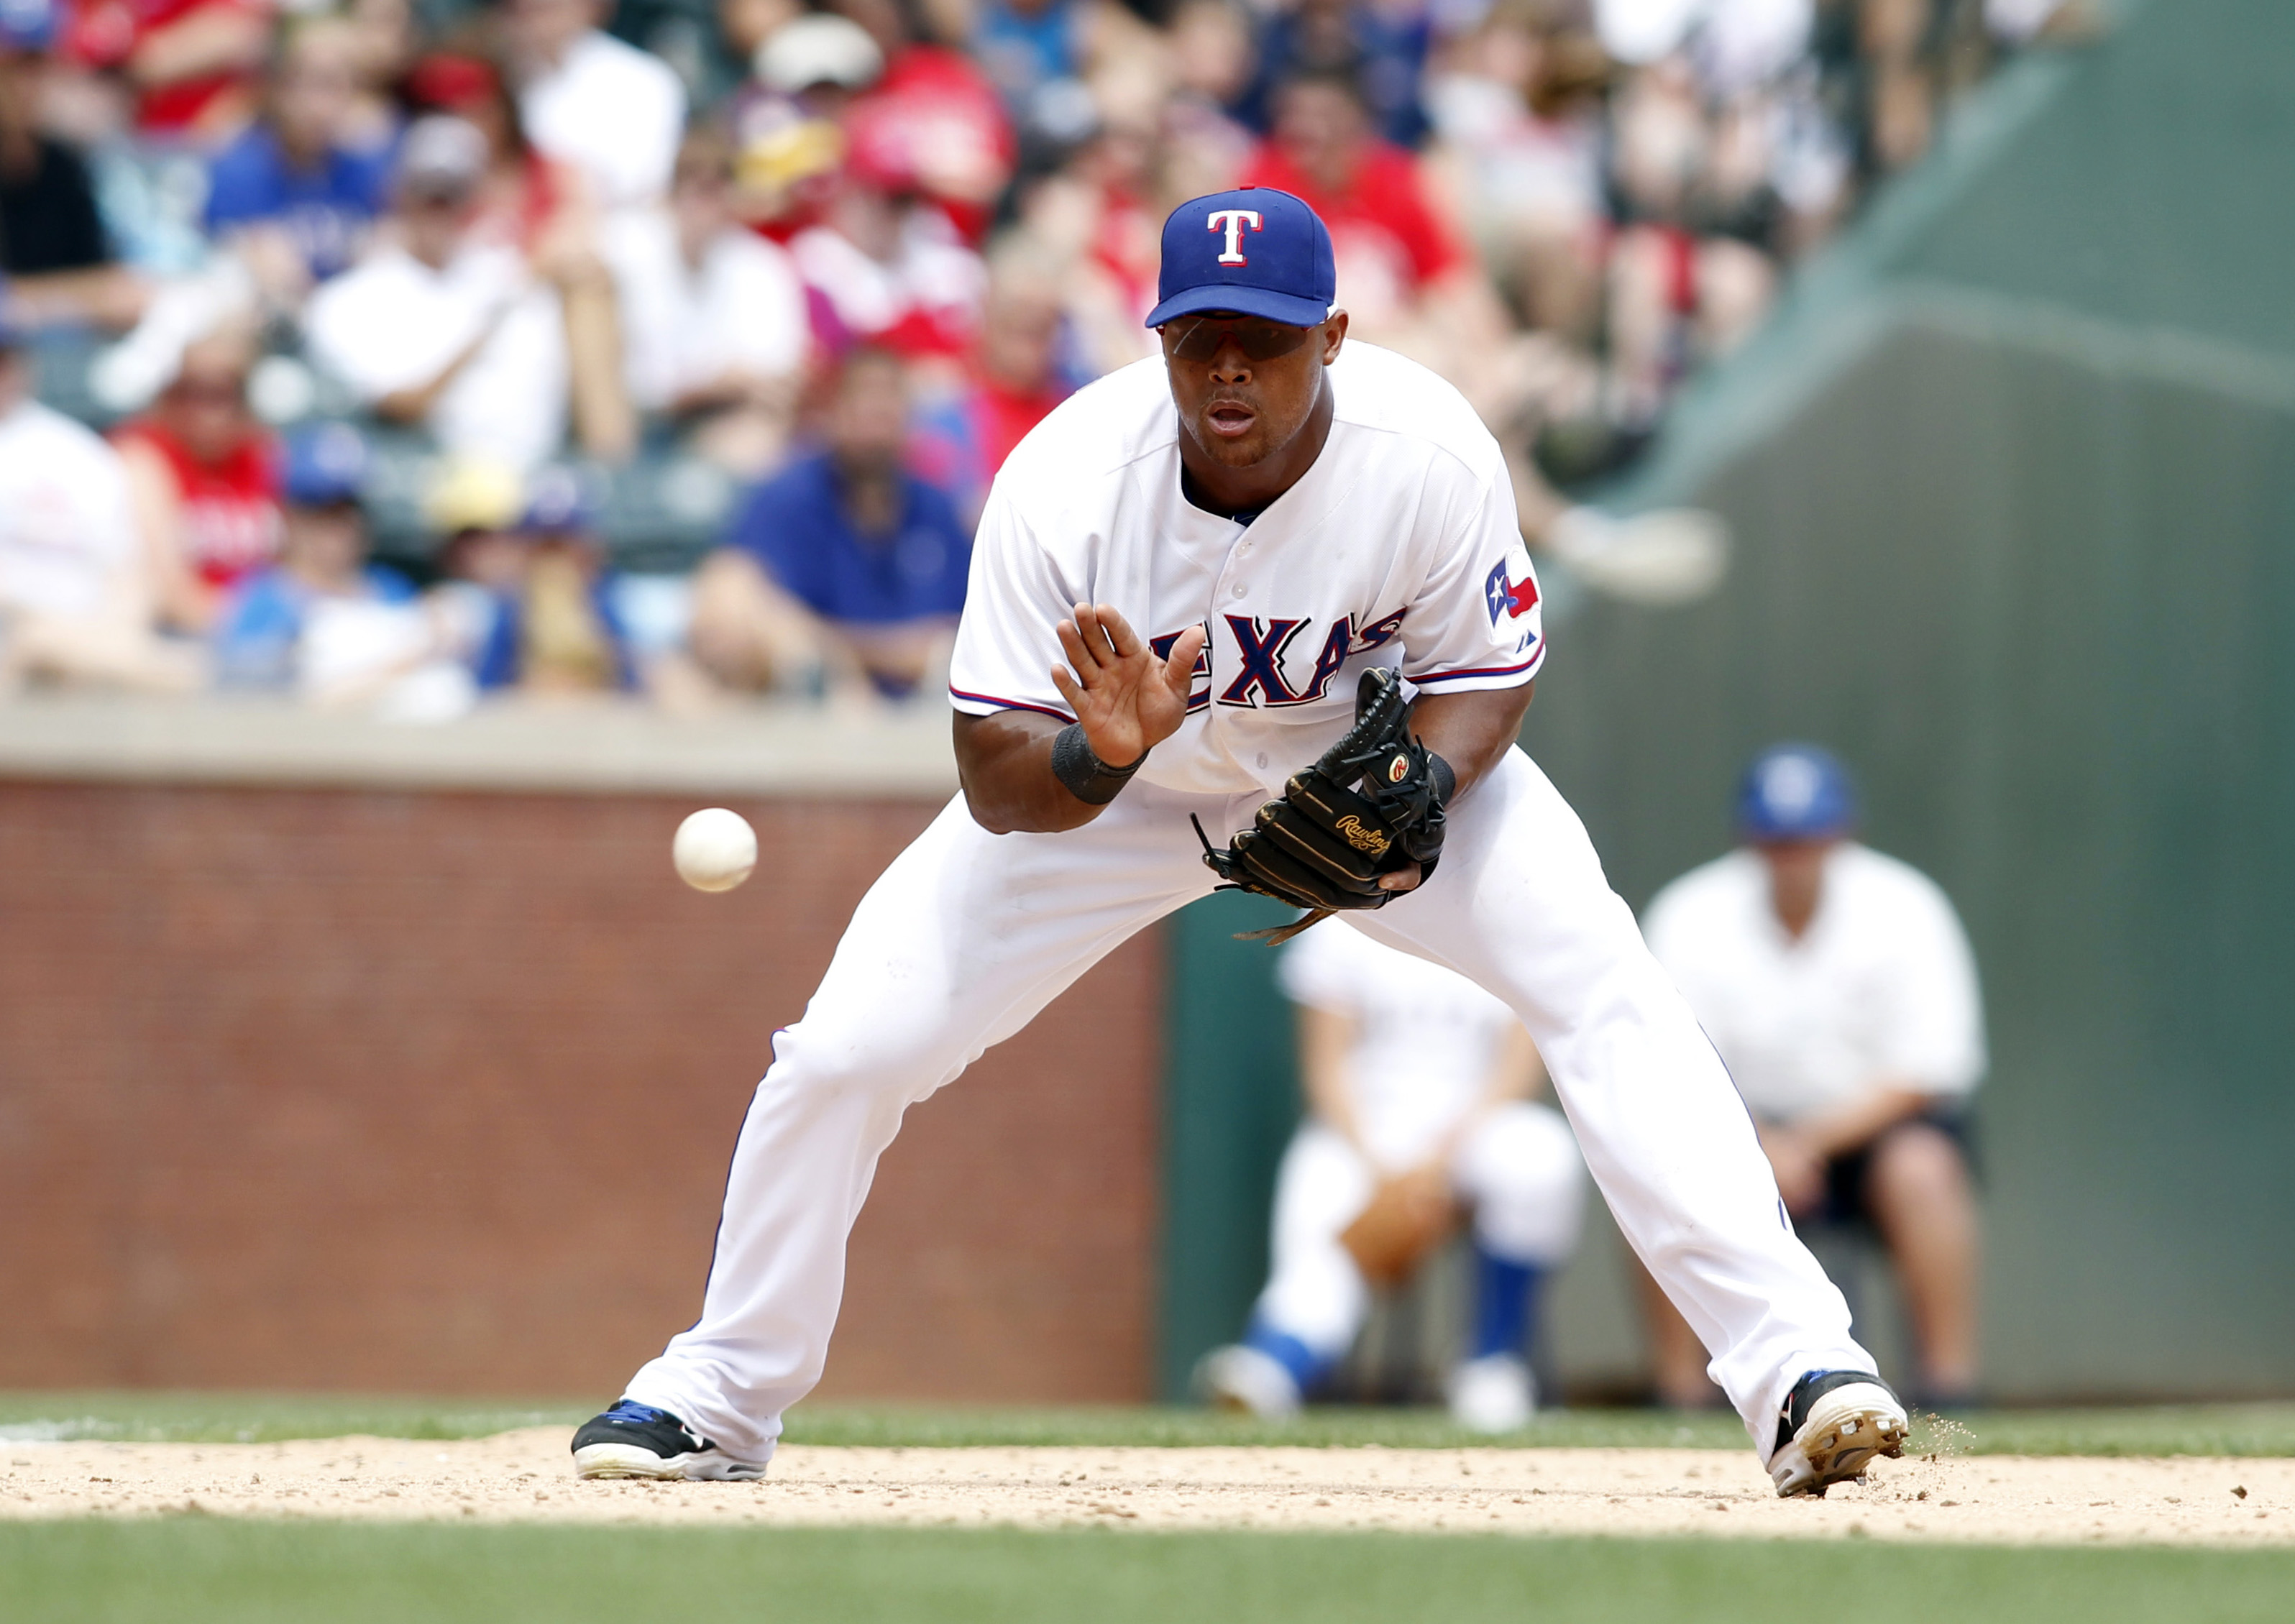 Rangers to be cautious with Adrian Beltre; return Thursday is likely